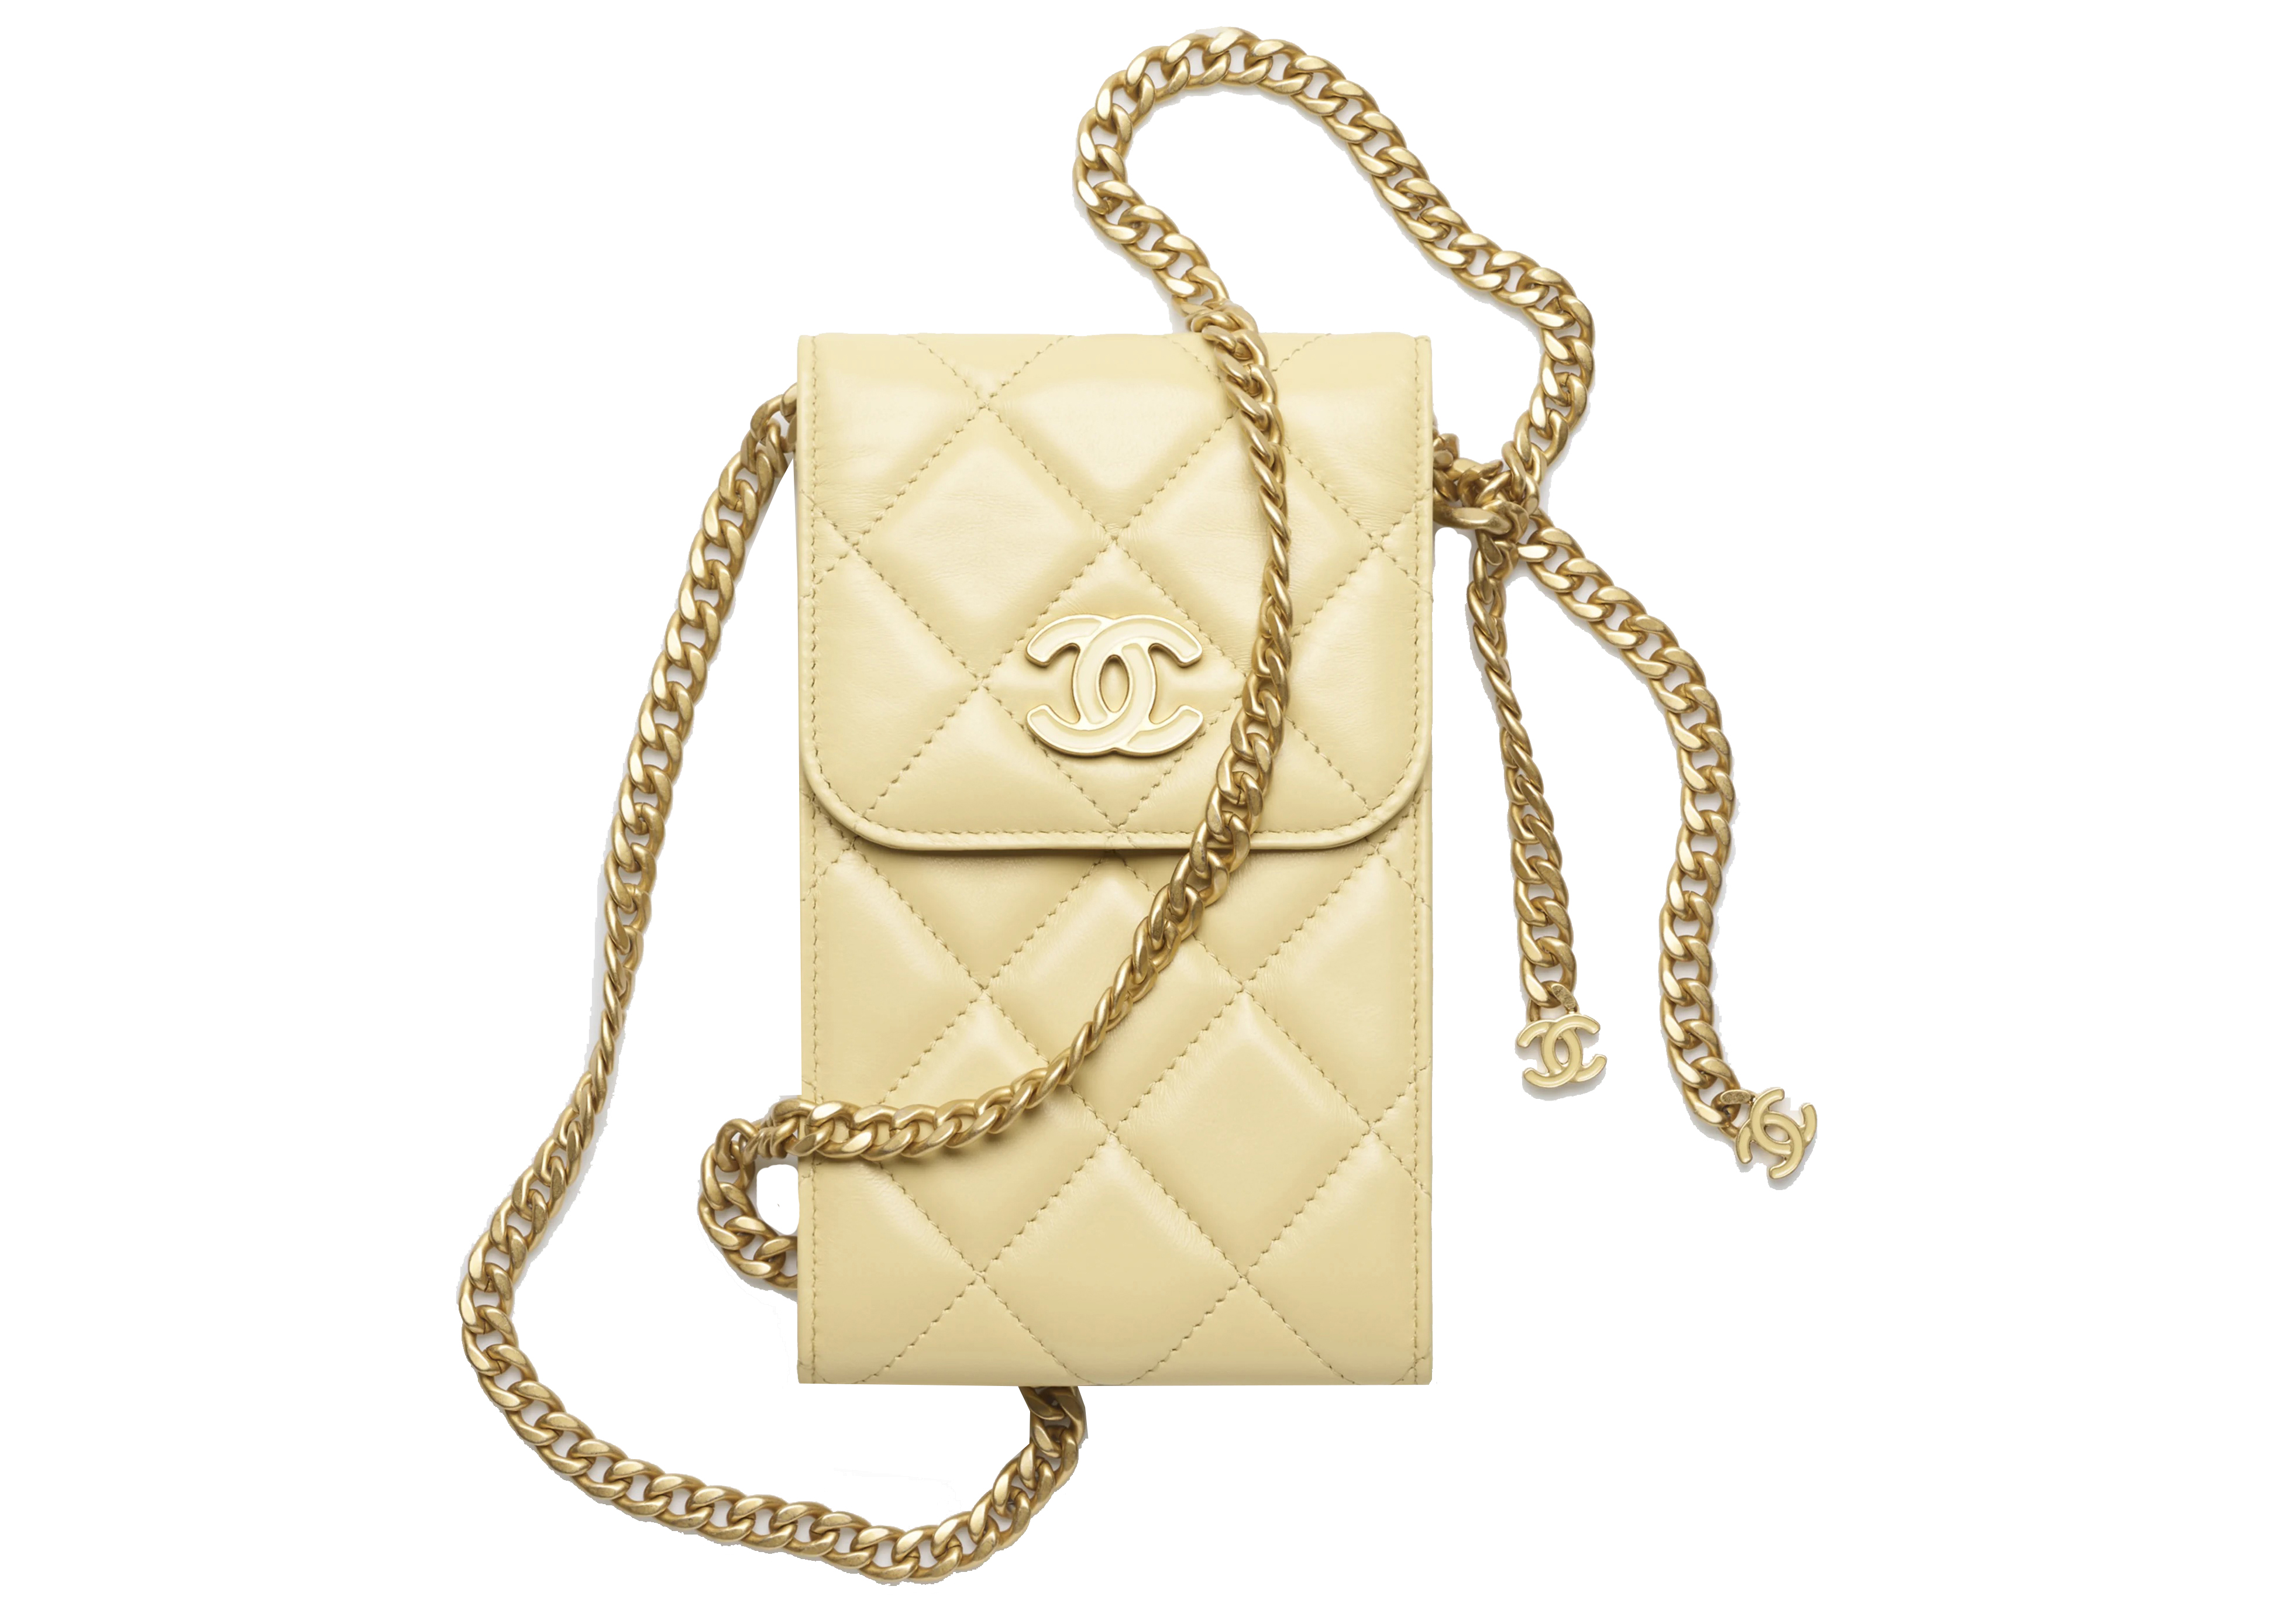 CHANEL Lambskin Quilted Pearl Crush Phone Holder With Chain White 698881   FASHIONPHILE